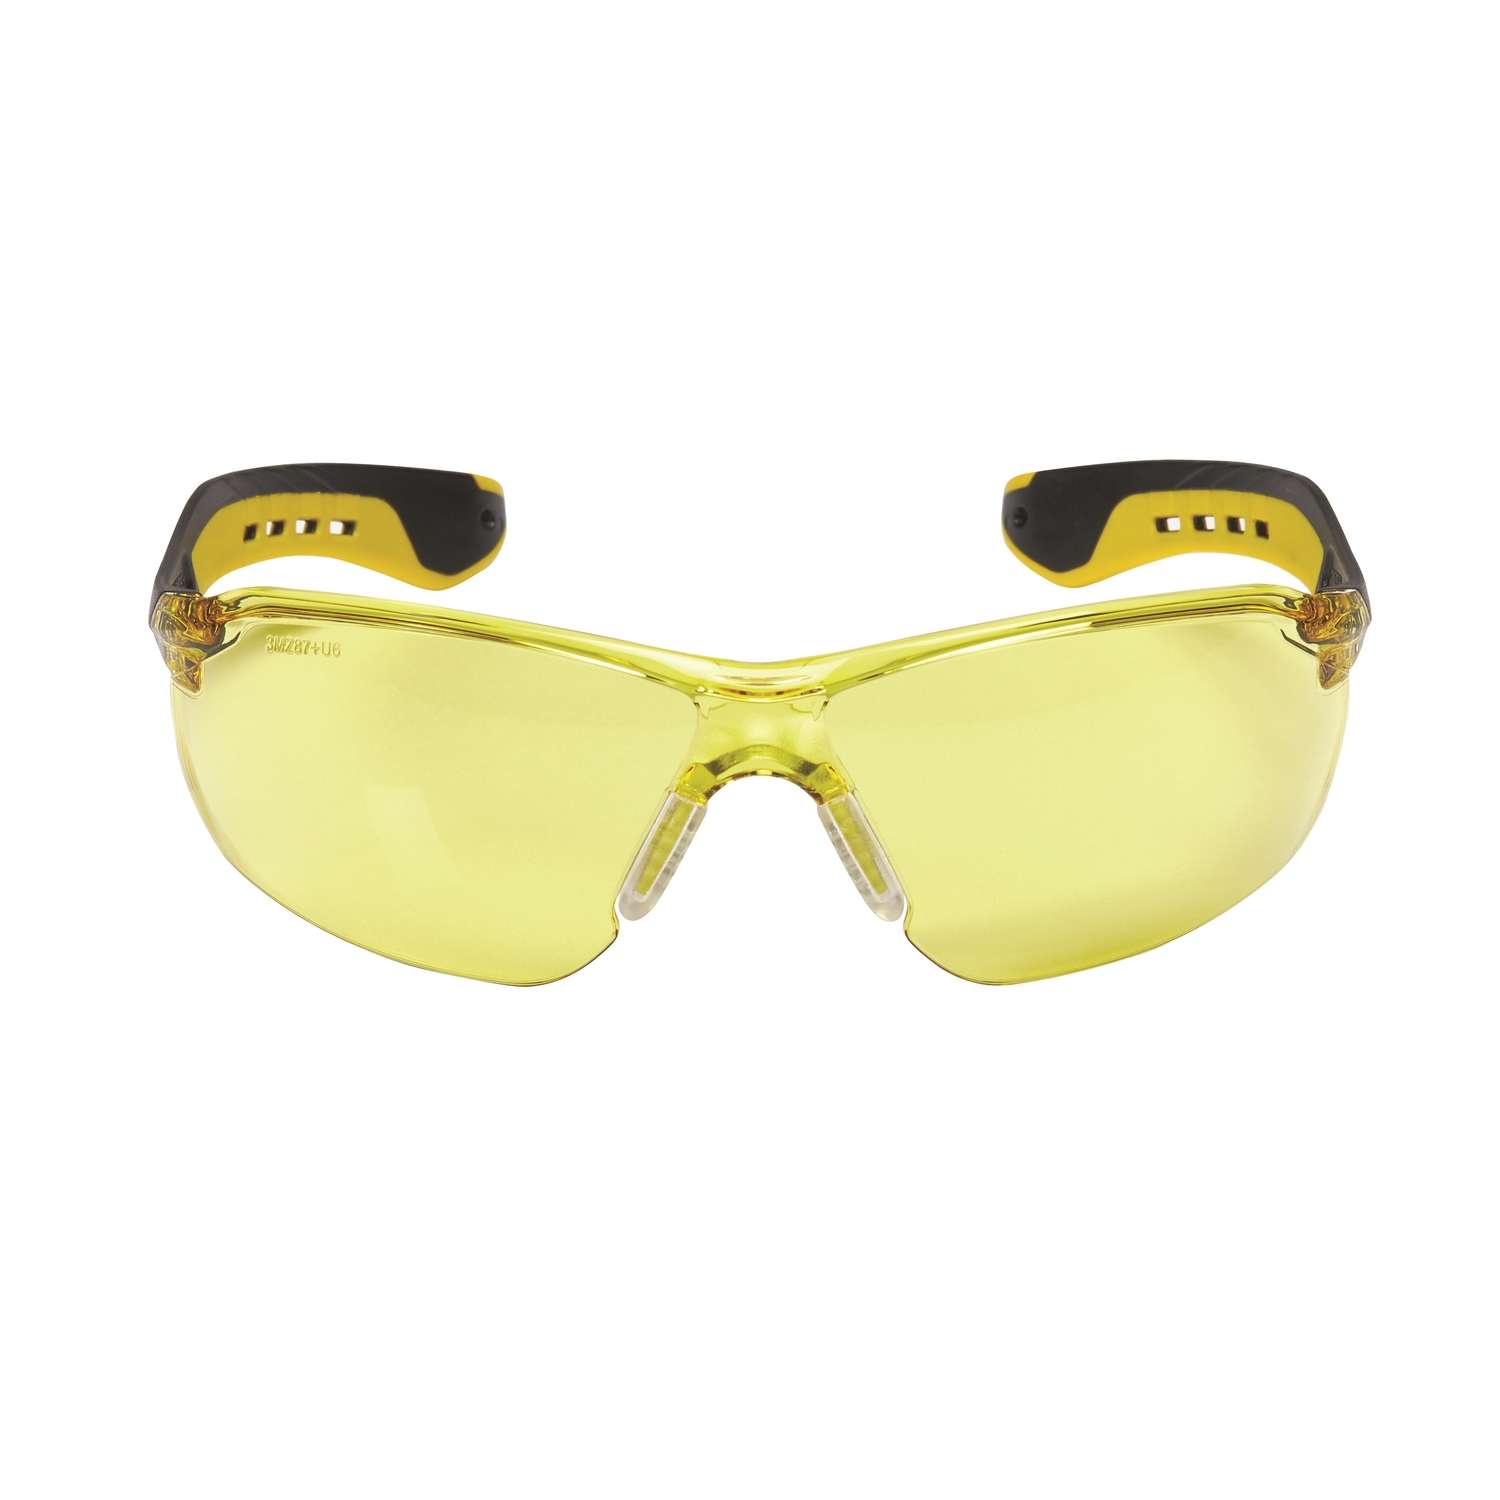 3M Safety Glasses Yellow Lens Black/Yellow Frame 1 pc. Ace Hardware